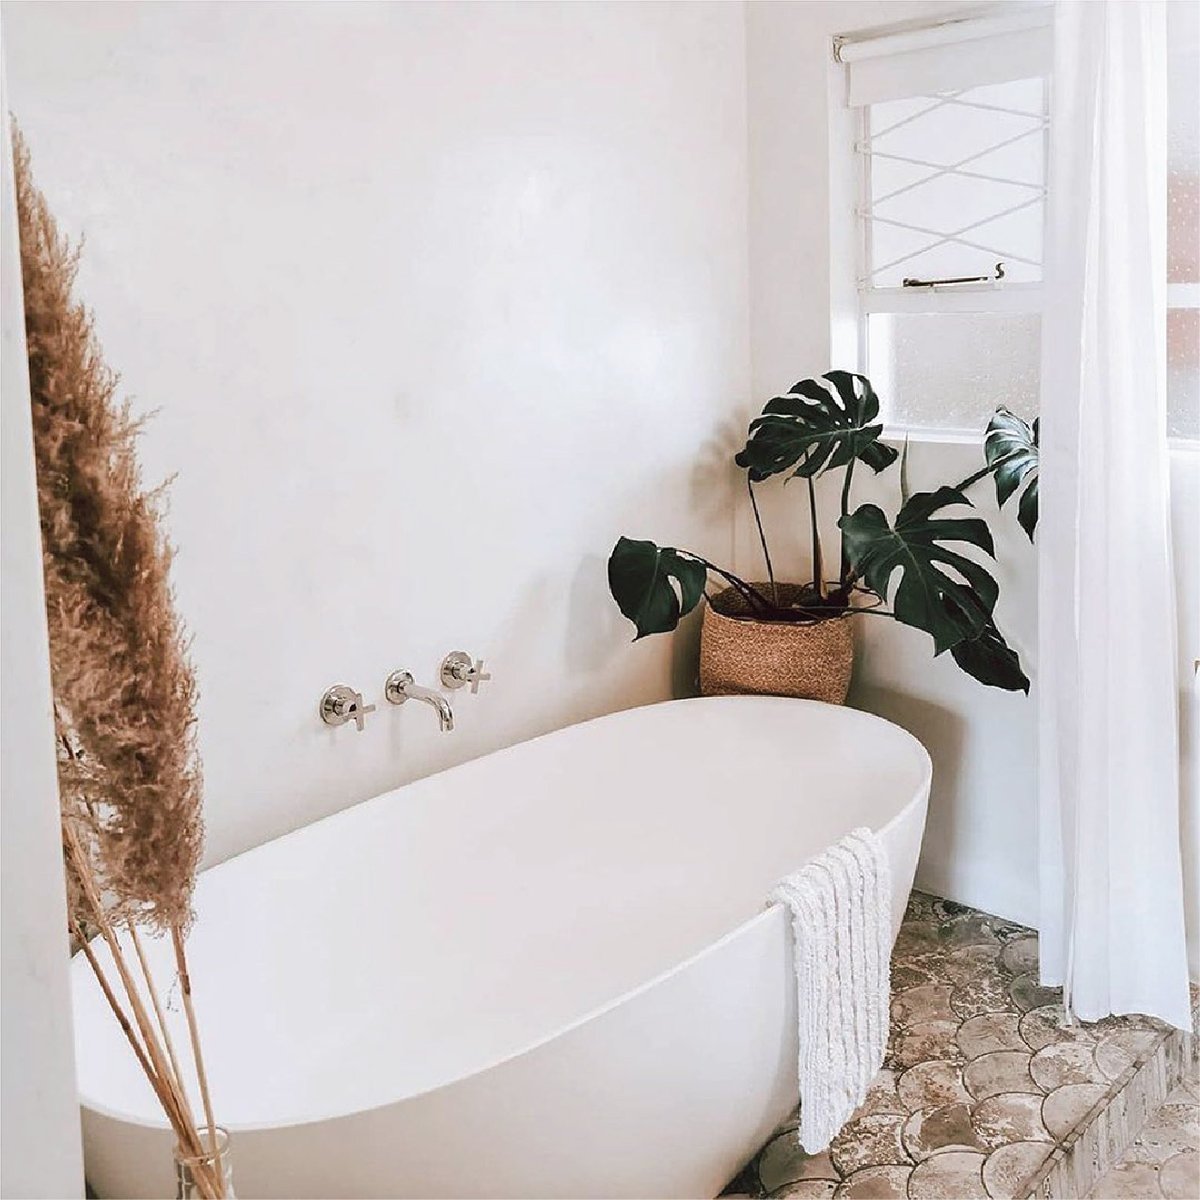 We absolutely adore seeing the awesome projects you’ve finished! Share your creations with us – we can’t wait to see what you’ve accomplished! Featured: Taylor Bath. #taylorbath #freestandingbath #bathroomremodel #bathroomdesign #bathroomdecor #homeinterior #livingstonebaths